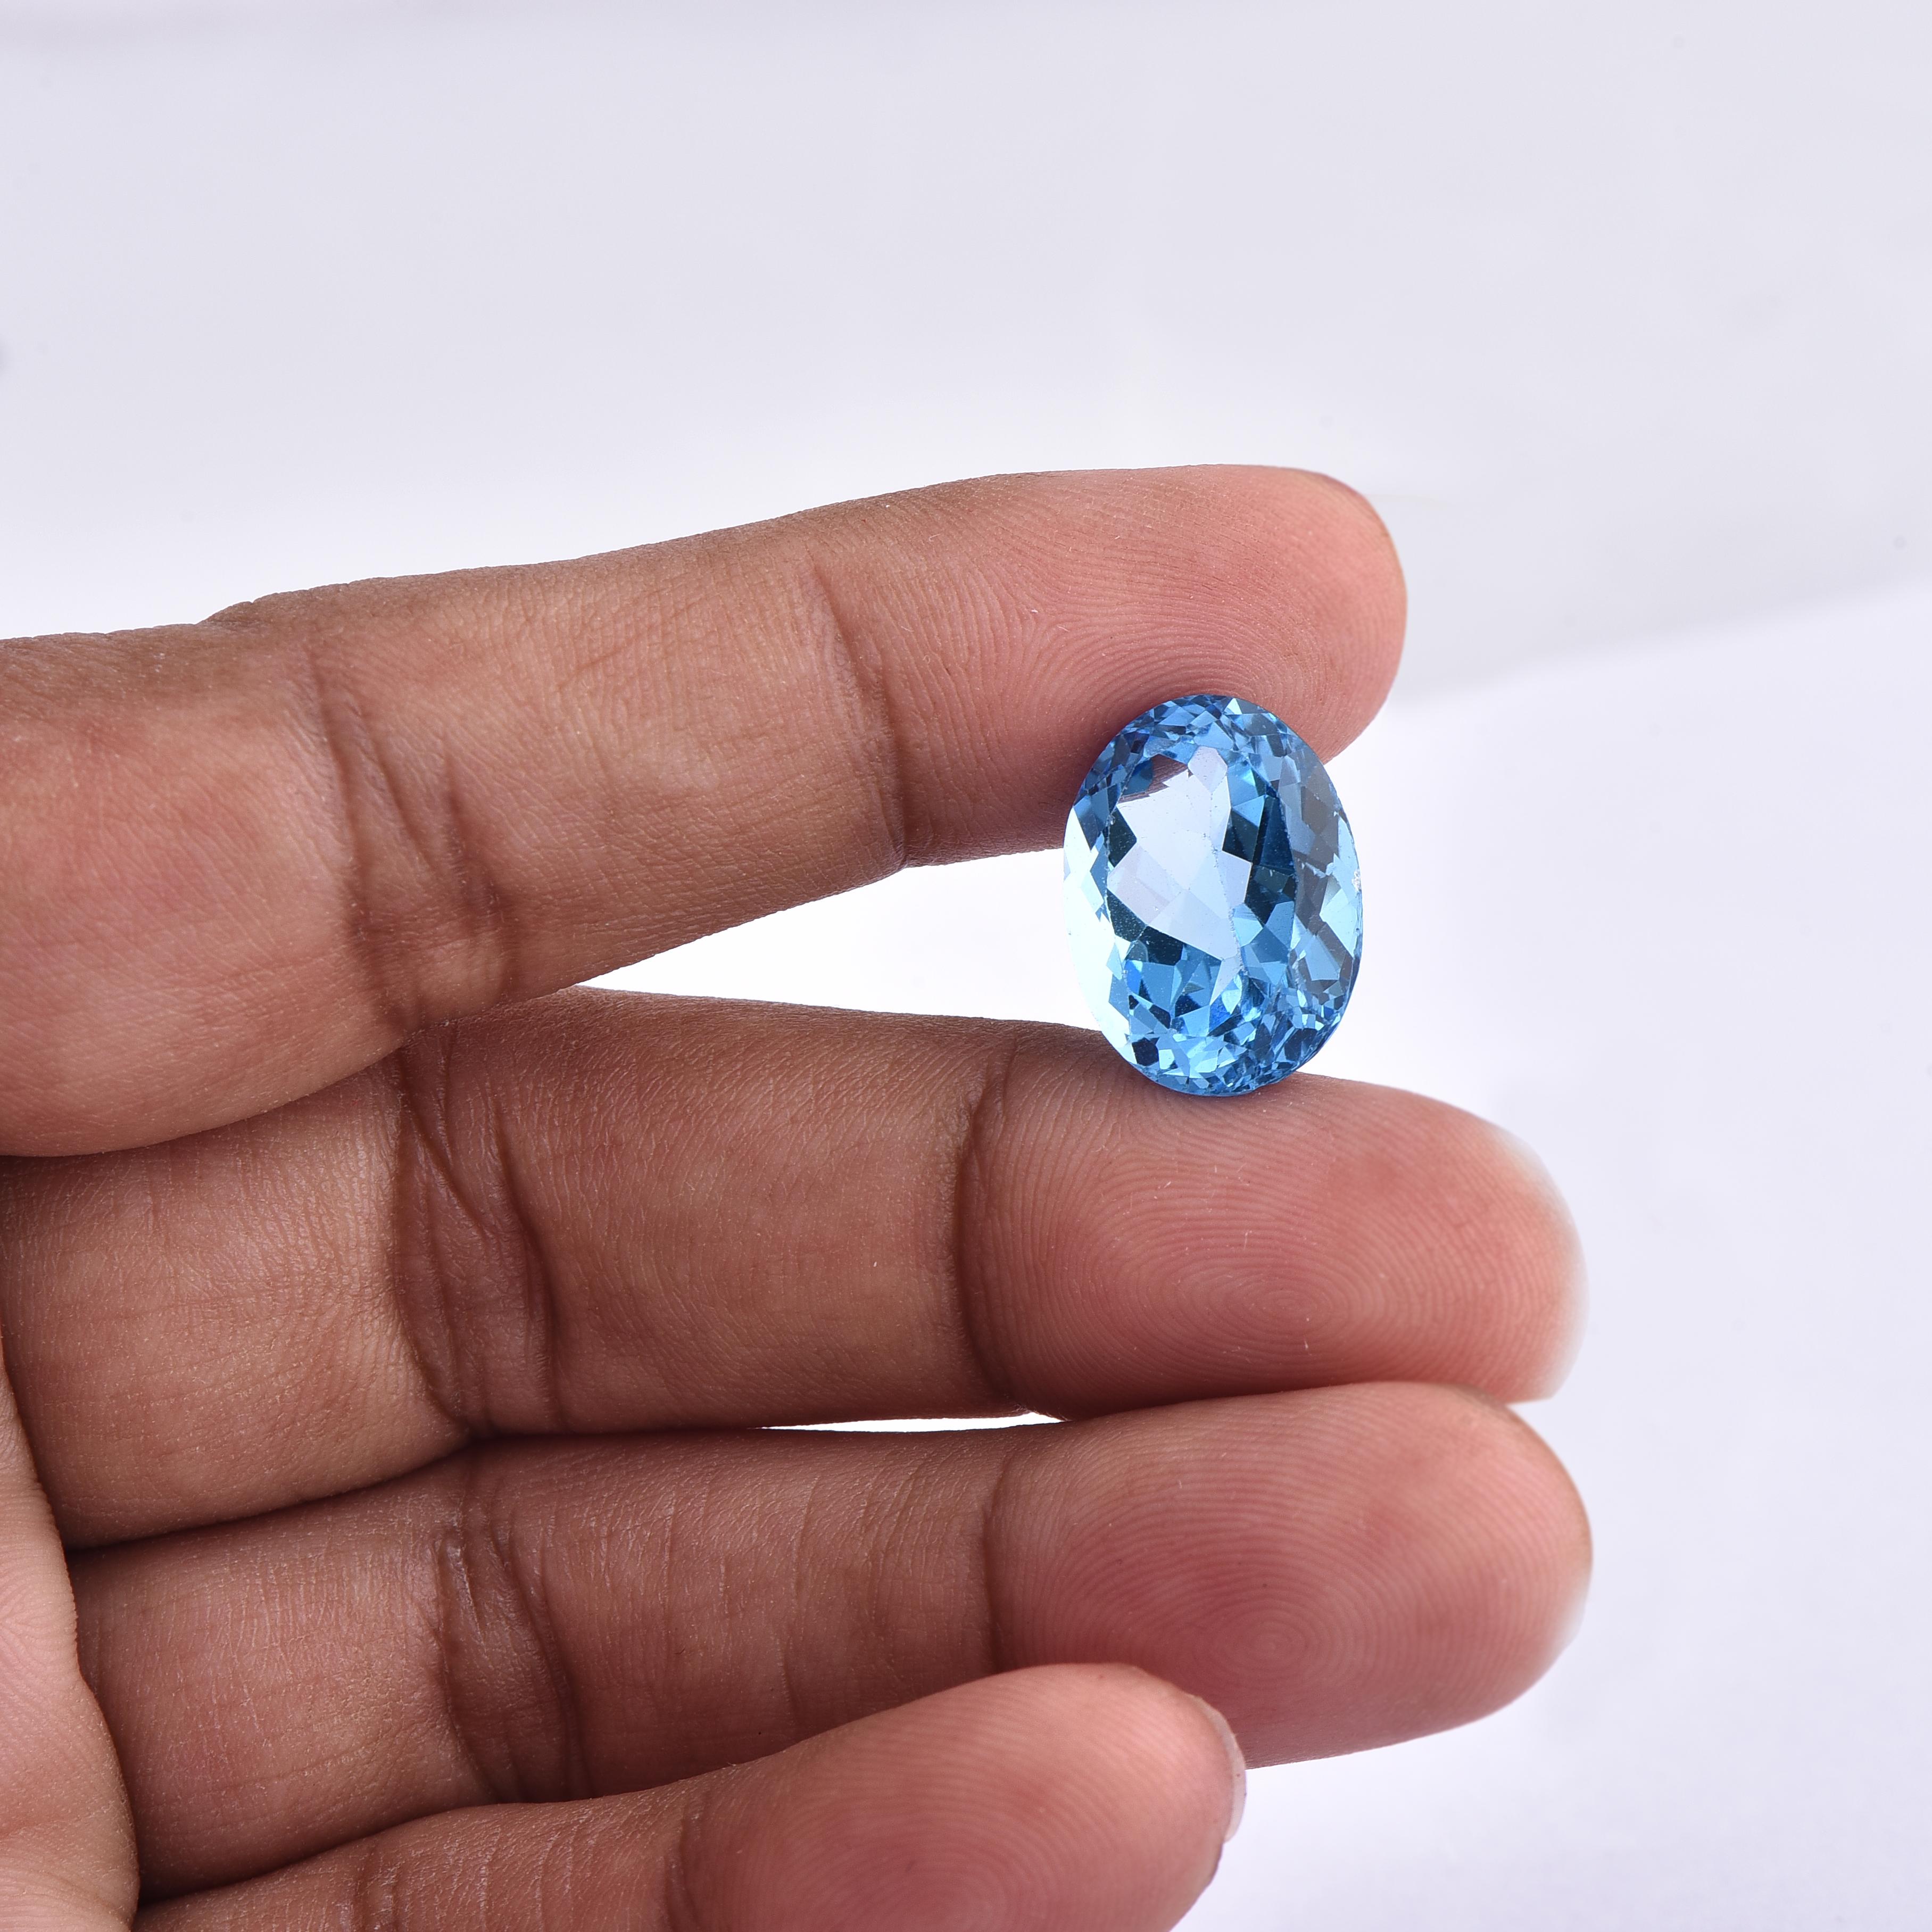 Modern TJD Loose Natural Swiss Blue Topaz 11.59ct Oval Shape Gemstone for Any Jewellery For Sale